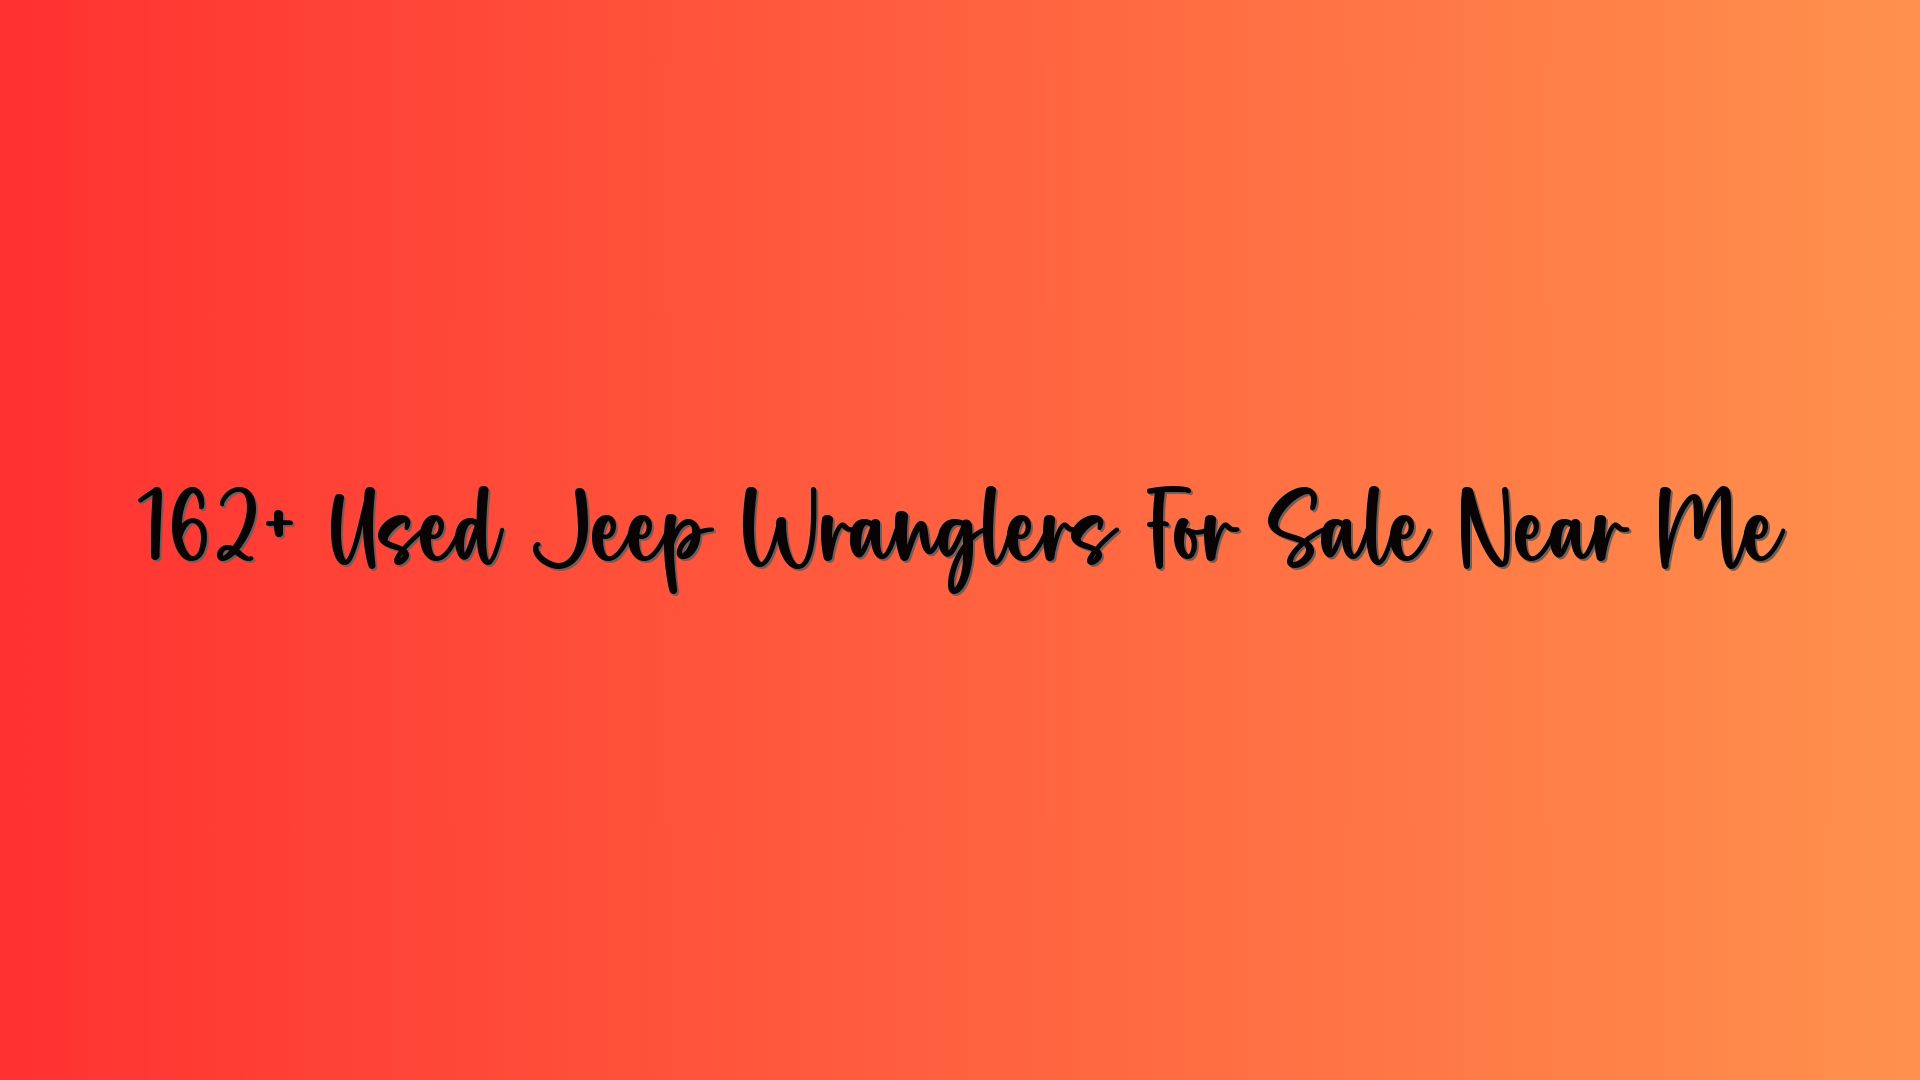 162+ Used Jeep Wranglers For Sale Near Me